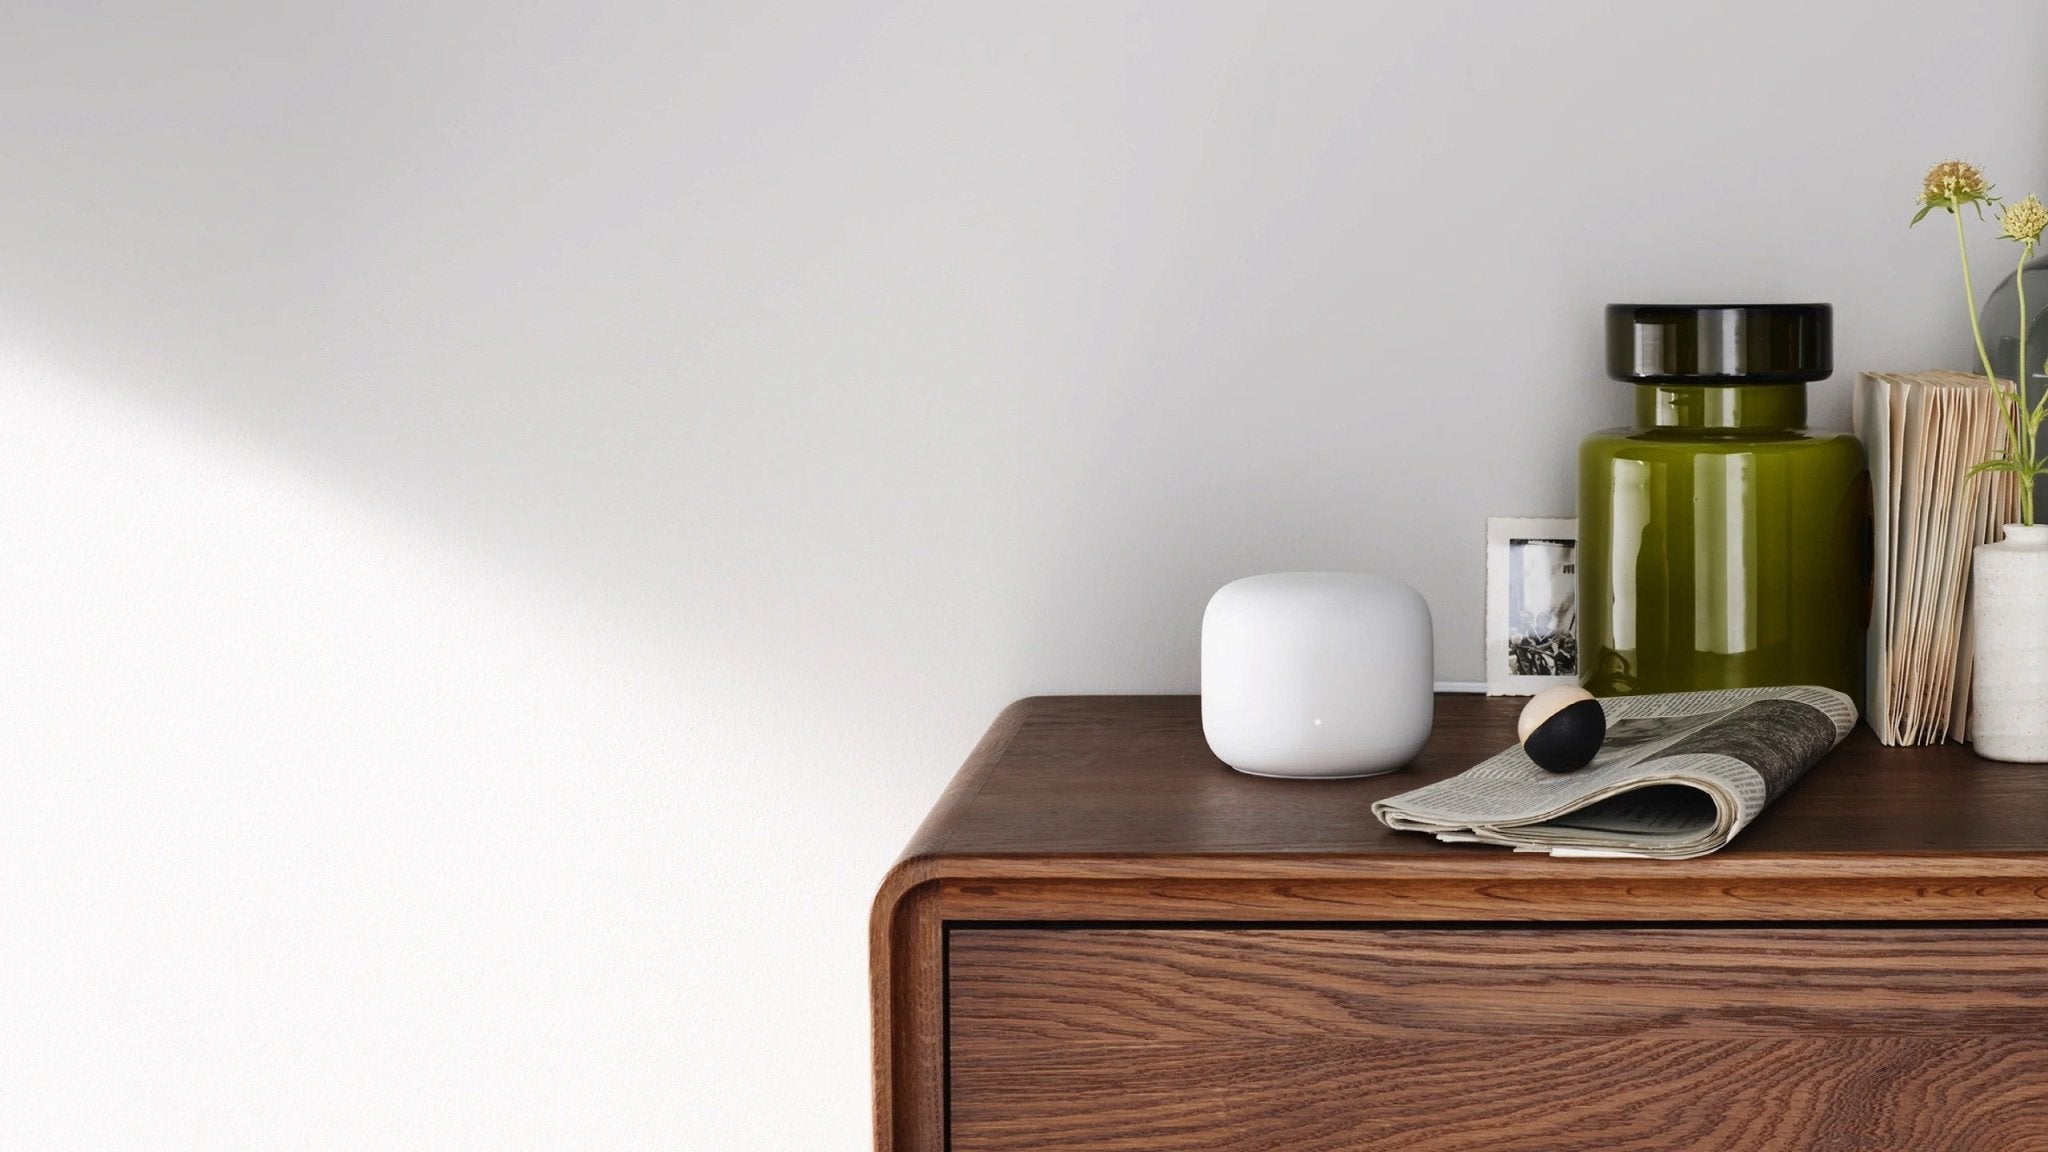 A Google Nest Wifi Snow displayed on a wood nightstand.